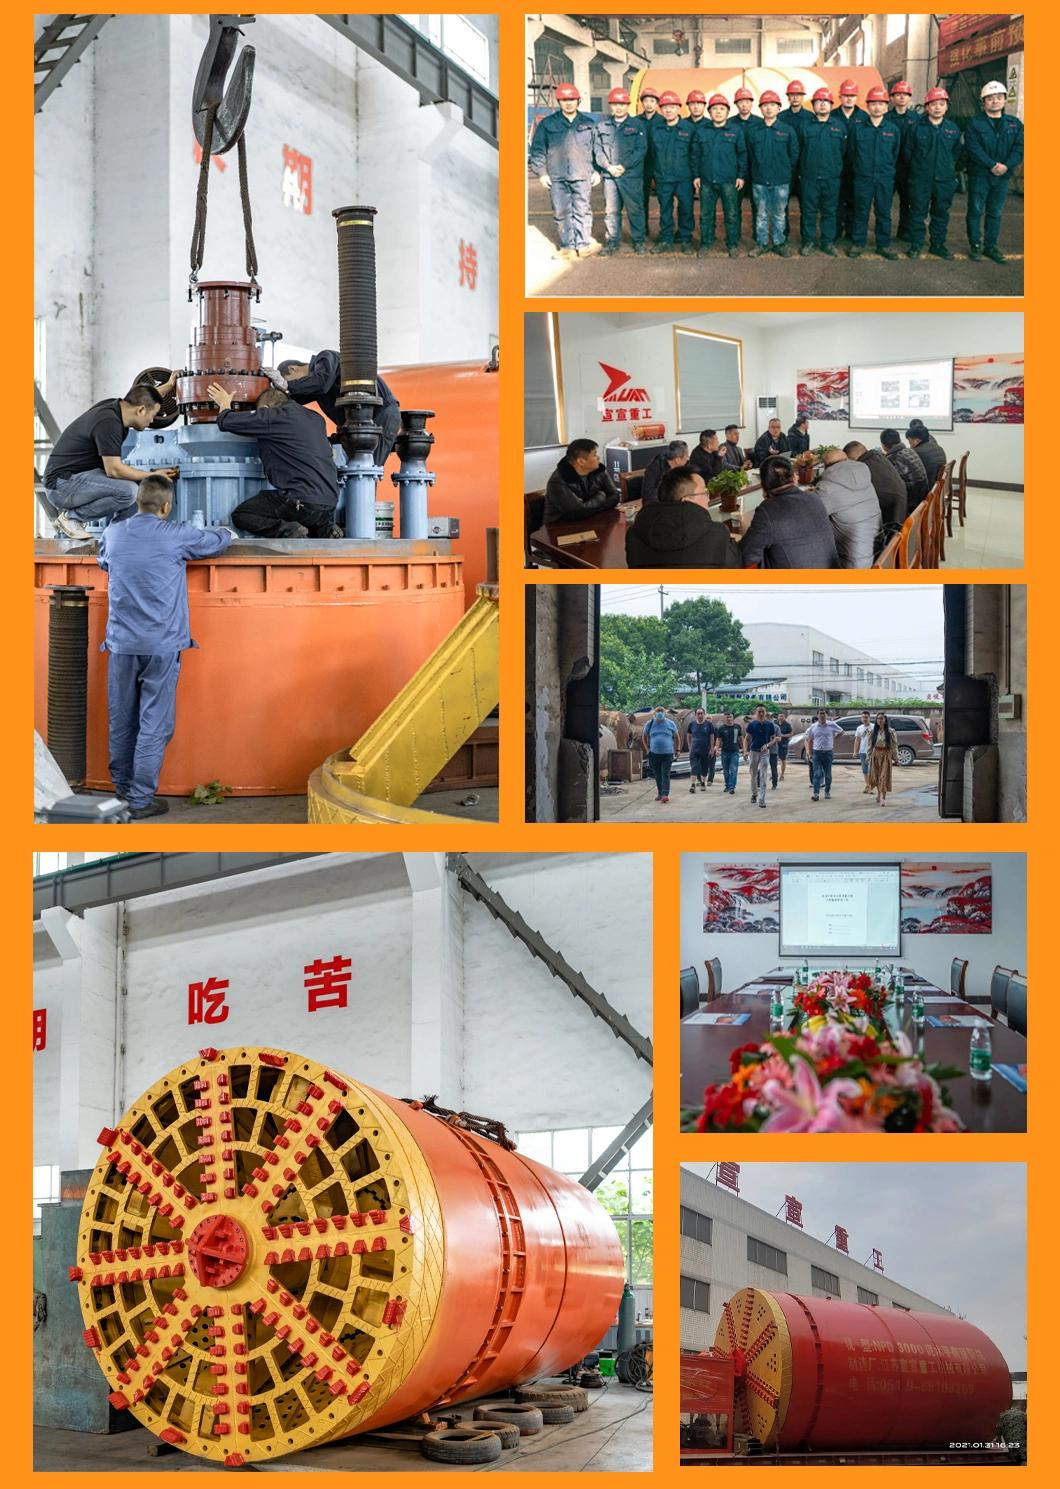 Hot Sale High Quality Trenchless Project Ysd3000 Rock Pipe Jacking Machine for Rcc